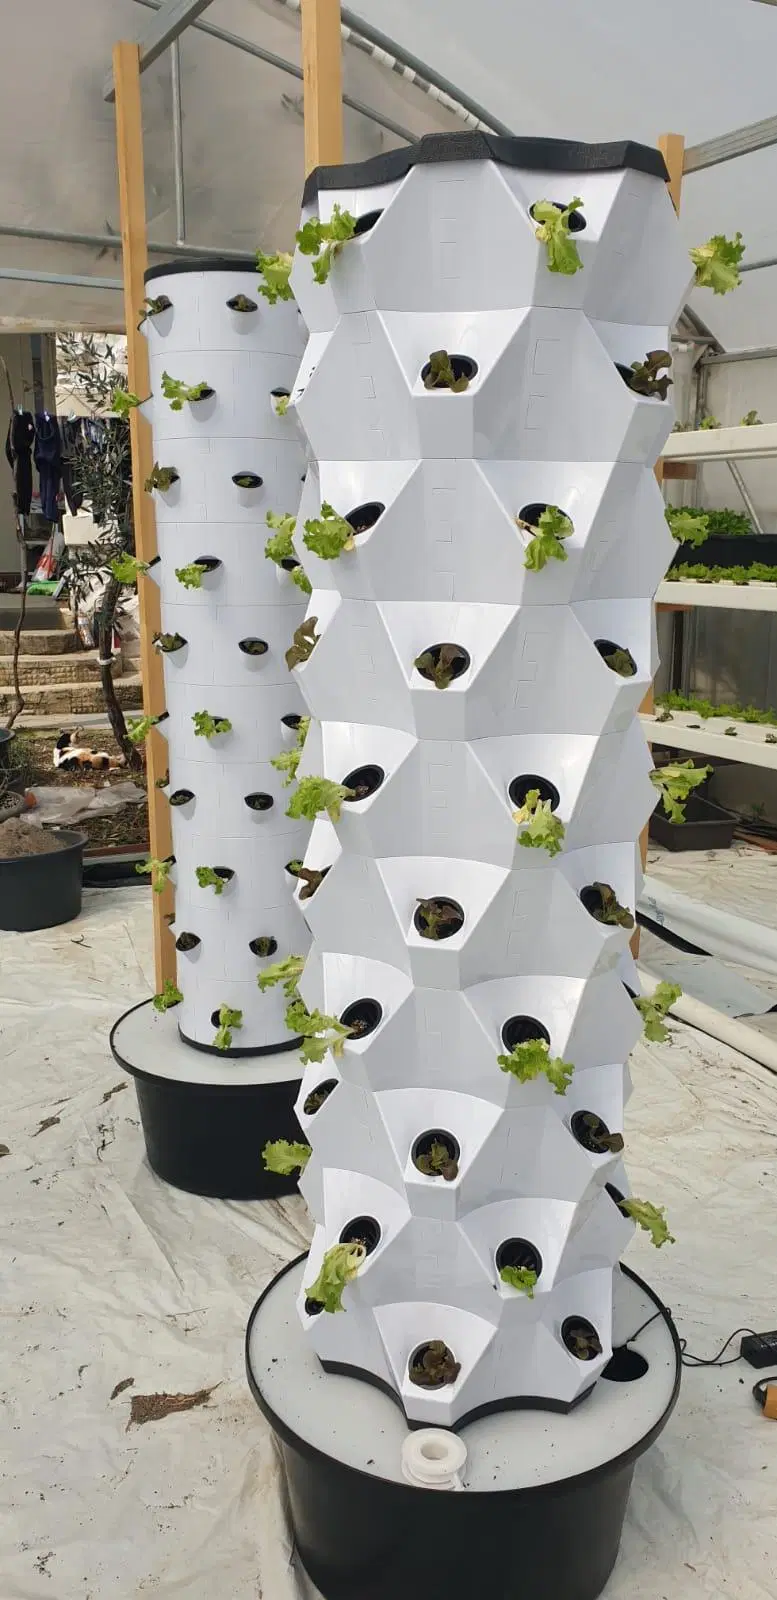 Hydroponics Greenhouse Garden Farm Indoor Plant Vertical Tower Growing Systems